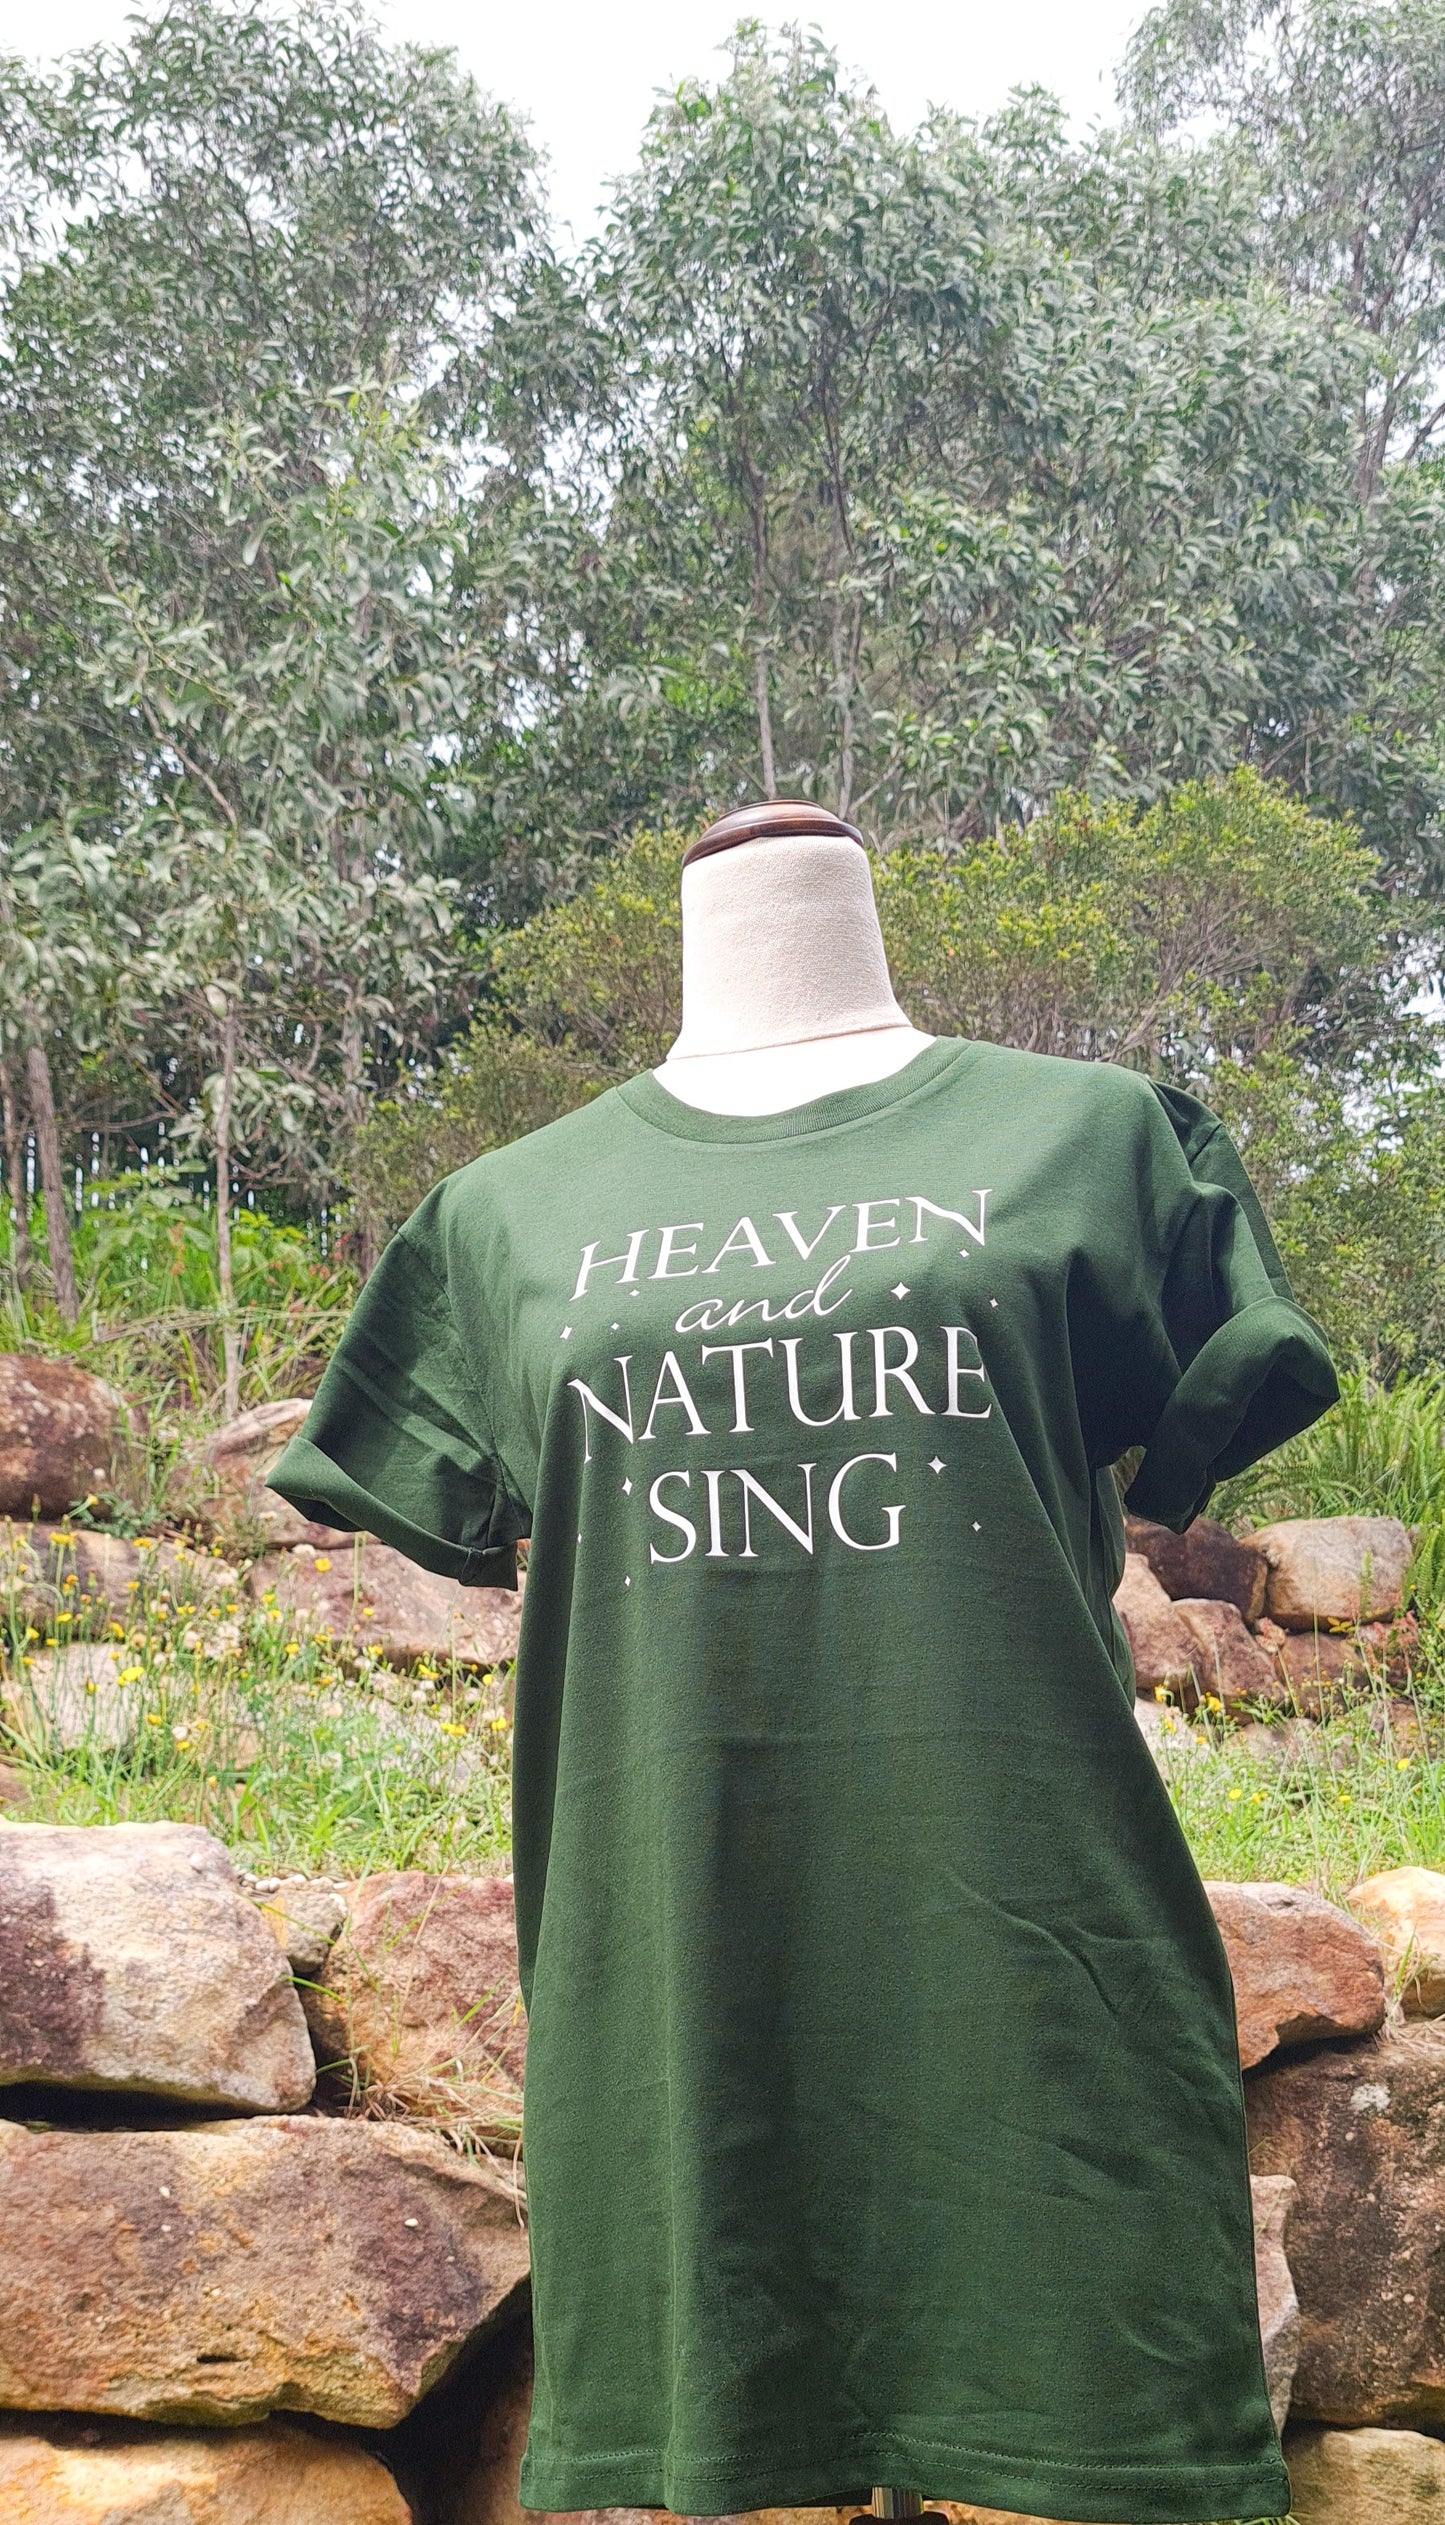 Heaven and Nature Sing Shirt